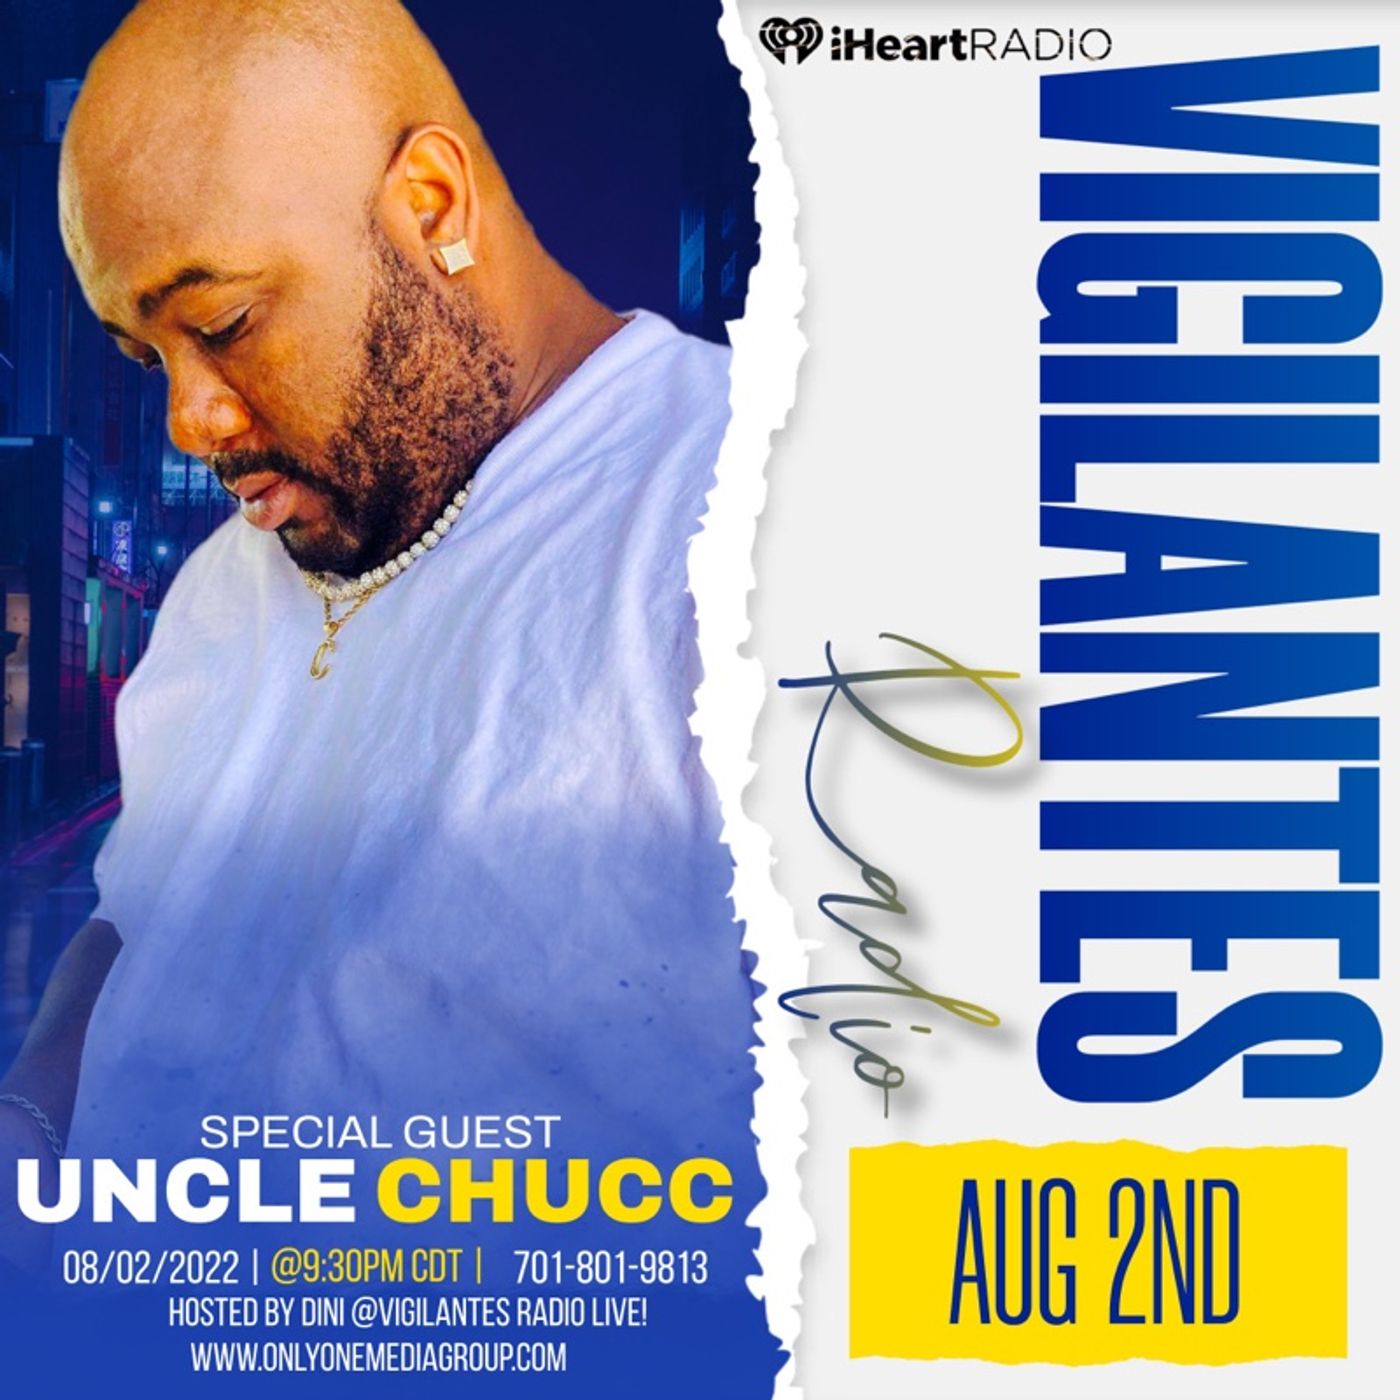 The Uncle Chucc Interview. Image